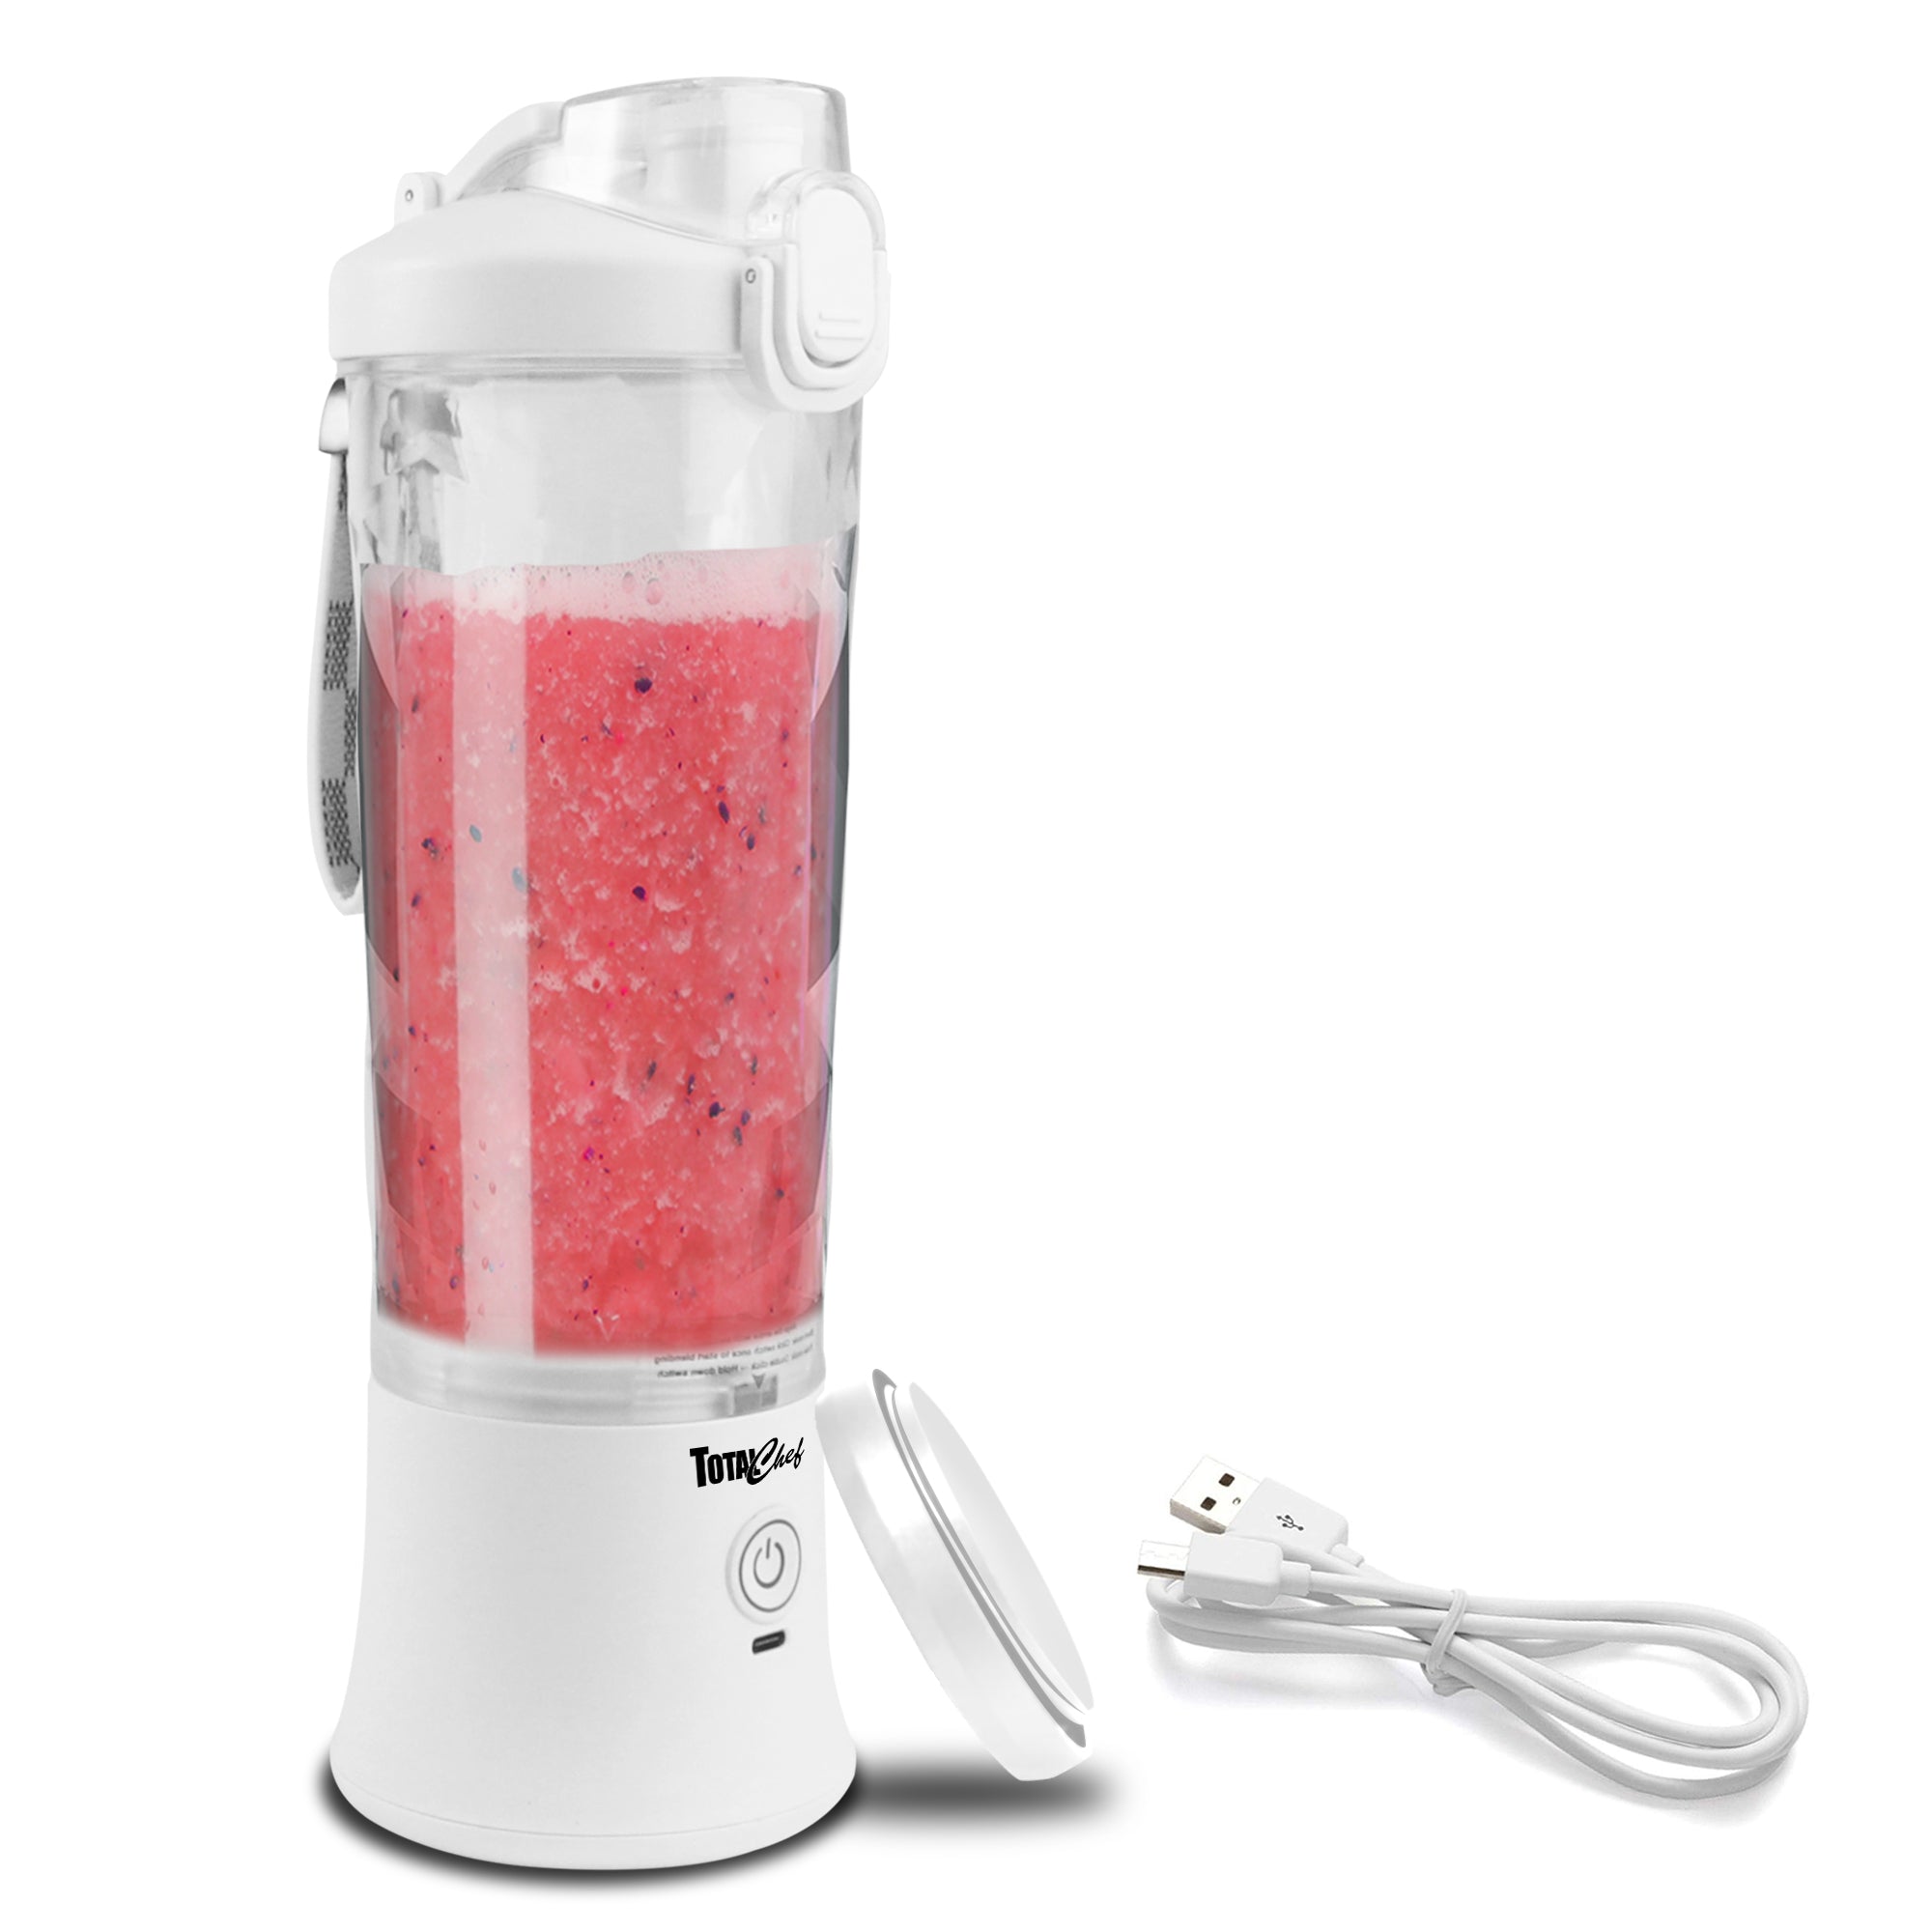 Total Chef Cordless Portable Blender, 20 oz, USB Rechargeable